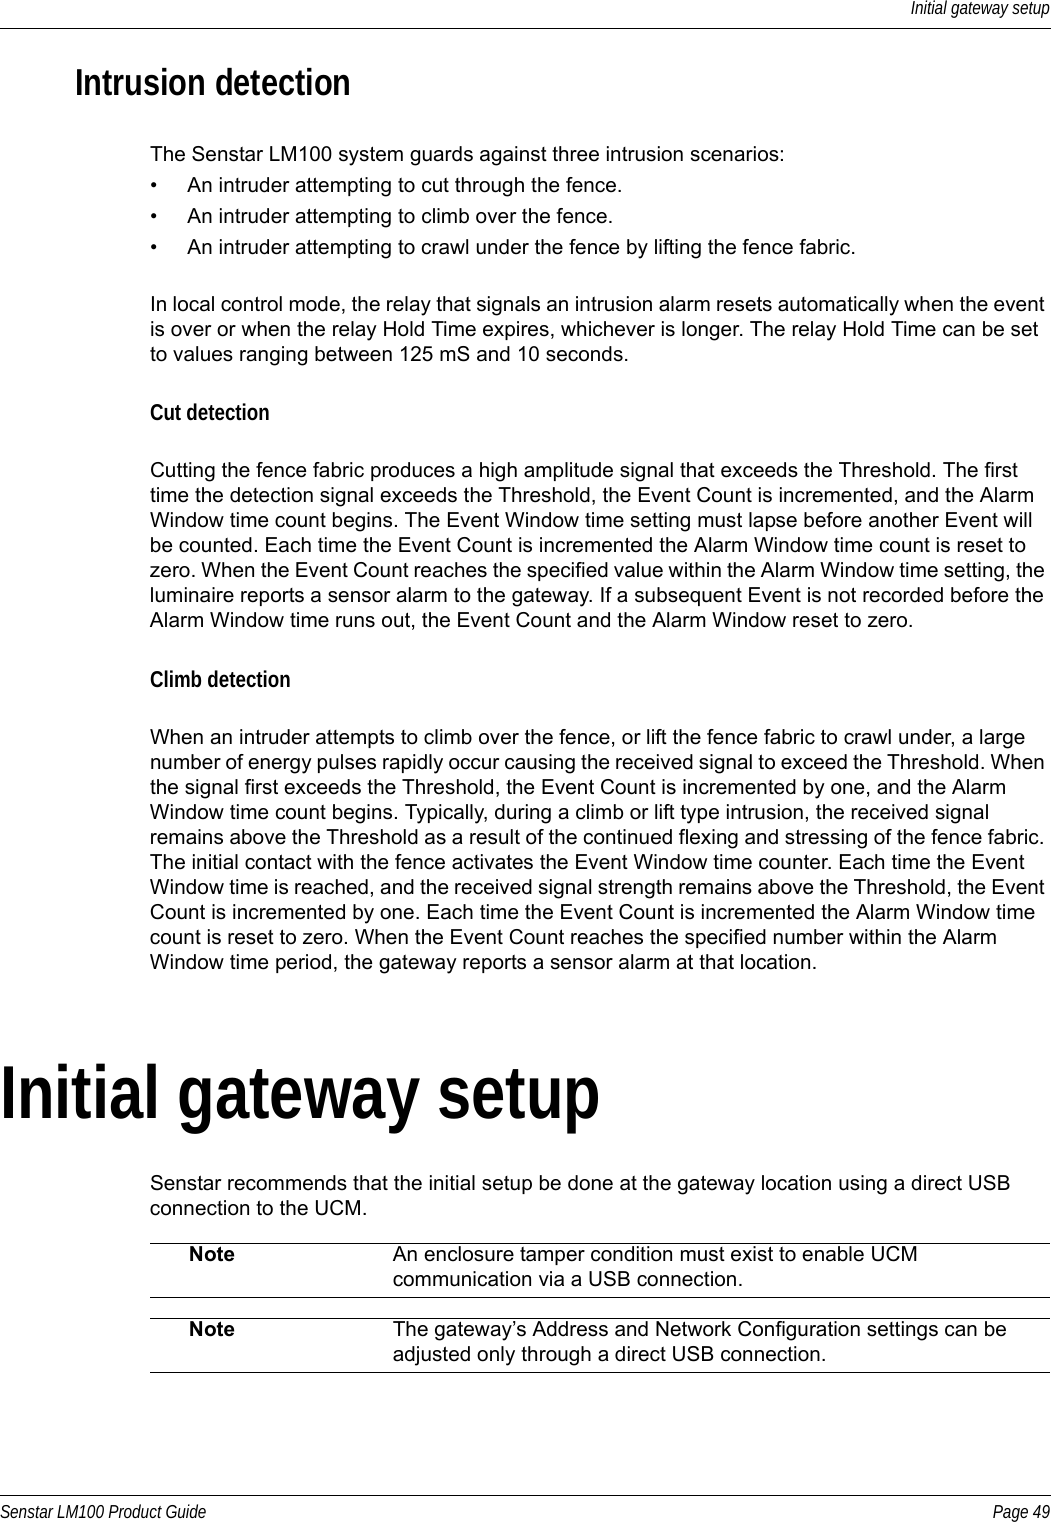 Initial gateway setupSenstar LM100 Product Guide Page 49Intrusion detectionThe Senstar LM100 system guards against three intrusion scenarios:• An intruder attempting to cut through the fence.• An intruder attempting to climb over the fence.• An intruder attempting to crawl under the fence by lifting the fence fabric.In local control mode, the relay that signals an intrusion alarm resets automatically when the event is over or when the relay Hold Time expires, whichever is longer. The relay Hold Time can be set to values ranging between 125 mS and 10 seconds.Cut detectionCutting the fence fabric produces a high amplitude signal that exceeds the Threshold. The first time the detection signal exceeds the Threshold, the Event Count is incremented, and the Alarm Window time count begins. The Event Window time setting must lapse before another Event will be counted. Each time the Event Count is incremented the Alarm Window time count is reset to zero. When the Event Count reaches the specified value within the Alarm Window time setting, the luminaire reports a sensor alarm to the gateway. If a subsequent Event is not recorded before the Alarm Window time runs out, the Event Count and the Alarm Window reset to zero.Climb detectionWhen an intruder attempts to climb over the fence, or lift the fence fabric to crawl under, a large number of energy pulses rapidly occur causing the received signal to exceed the Threshold. When the signal first exceeds the Threshold, the Event Count is incremented by one, and the Alarm Window time count begins. Typically, during a climb or lift type intrusion, the received signal remains above the Threshold as a result of the continued flexing and stressing of the fence fabric. The initial contact with the fence activates the Event Window time counter. Each time the Event Window time is reached, and the received signal strength remains above the Threshold, the Event Count is incremented by one. Each time the Event Count is incremented the Alarm Window time count is reset to zero. When the Event Count reaches the specified number within the Alarm Window time period, the gateway reports a sensor alarm at that location.Initial gateway setupSenstar recommends that the initial setup be done at the gateway location using a direct USB connection to the UCM.  Note An enclosure tamper condition must exist to enable UCM communication via a USB connection.Note The gateway’s Address and Network Configuration settings can be adjusted only through a direct USB connection.